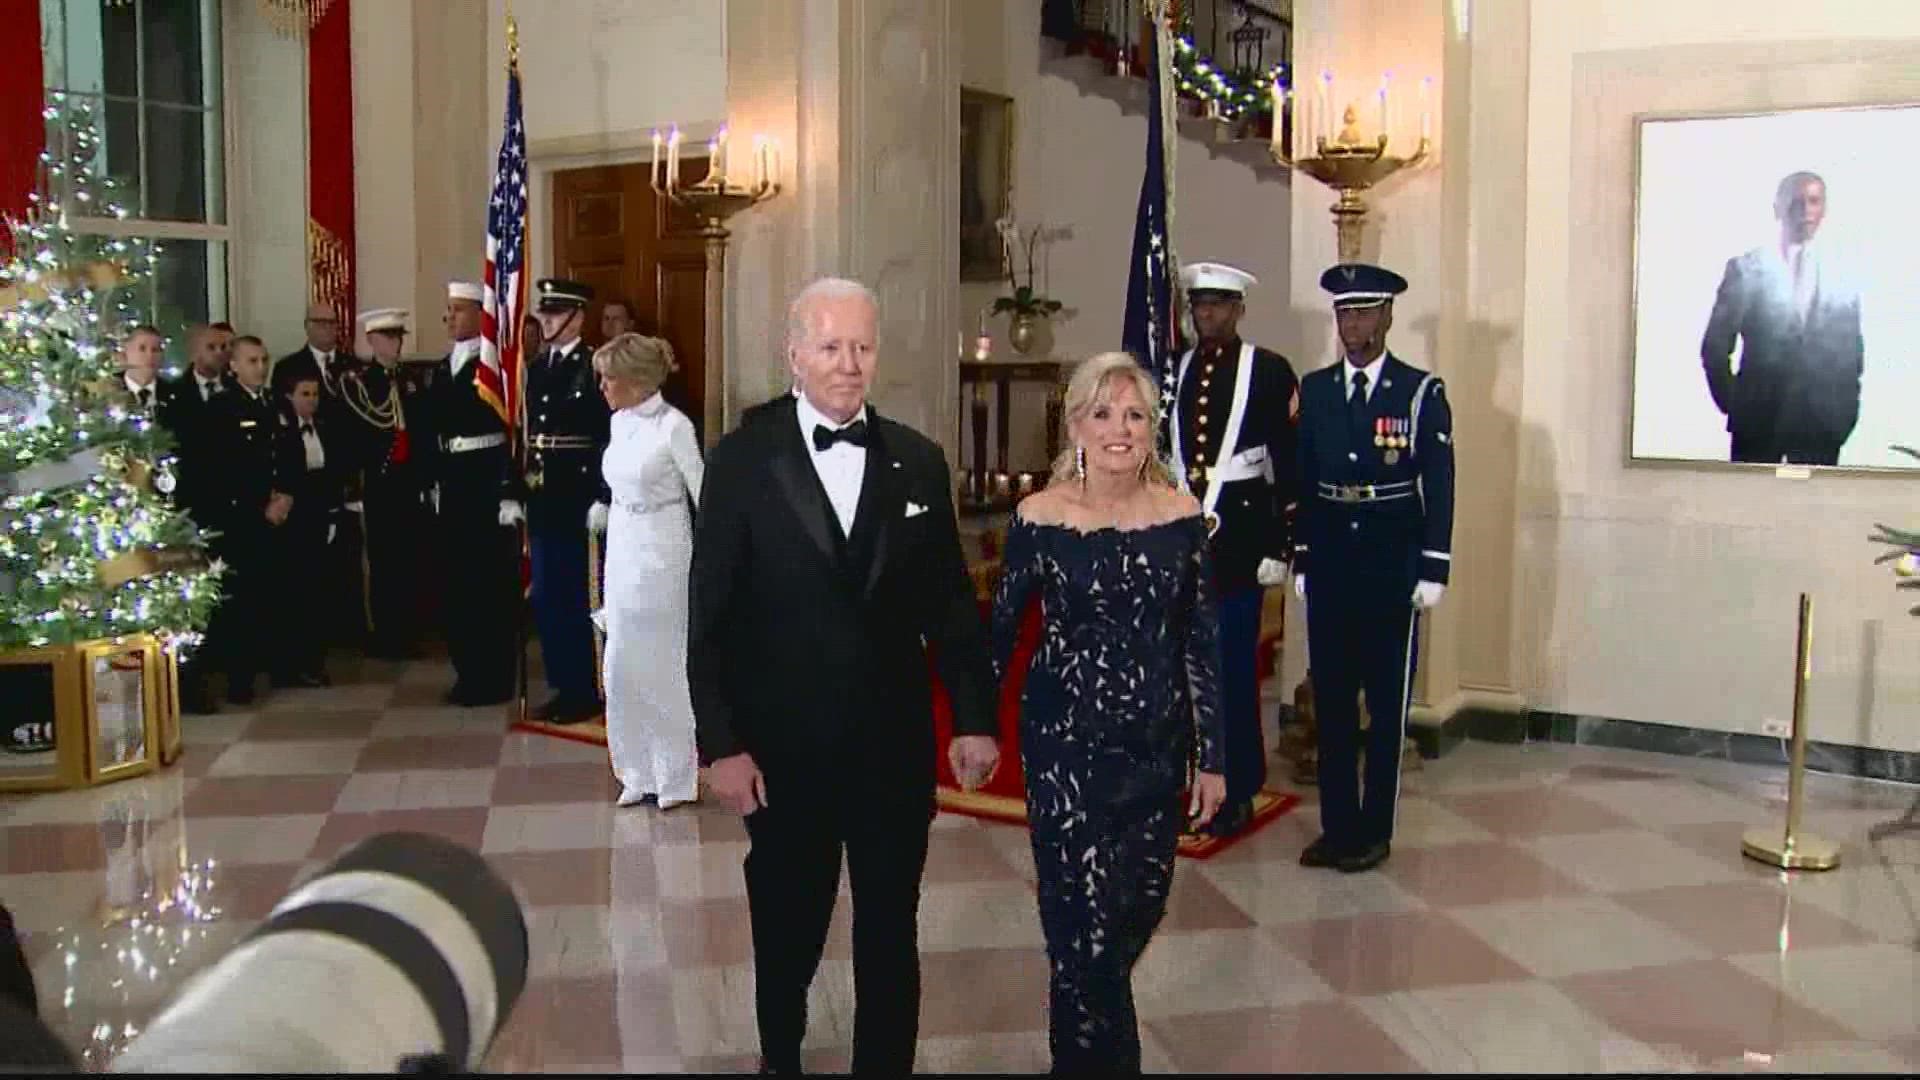 President Joe Biden hosted his first state dinner at the White House, honoring French President Emmanuel Macron and his wife, Brigitte.